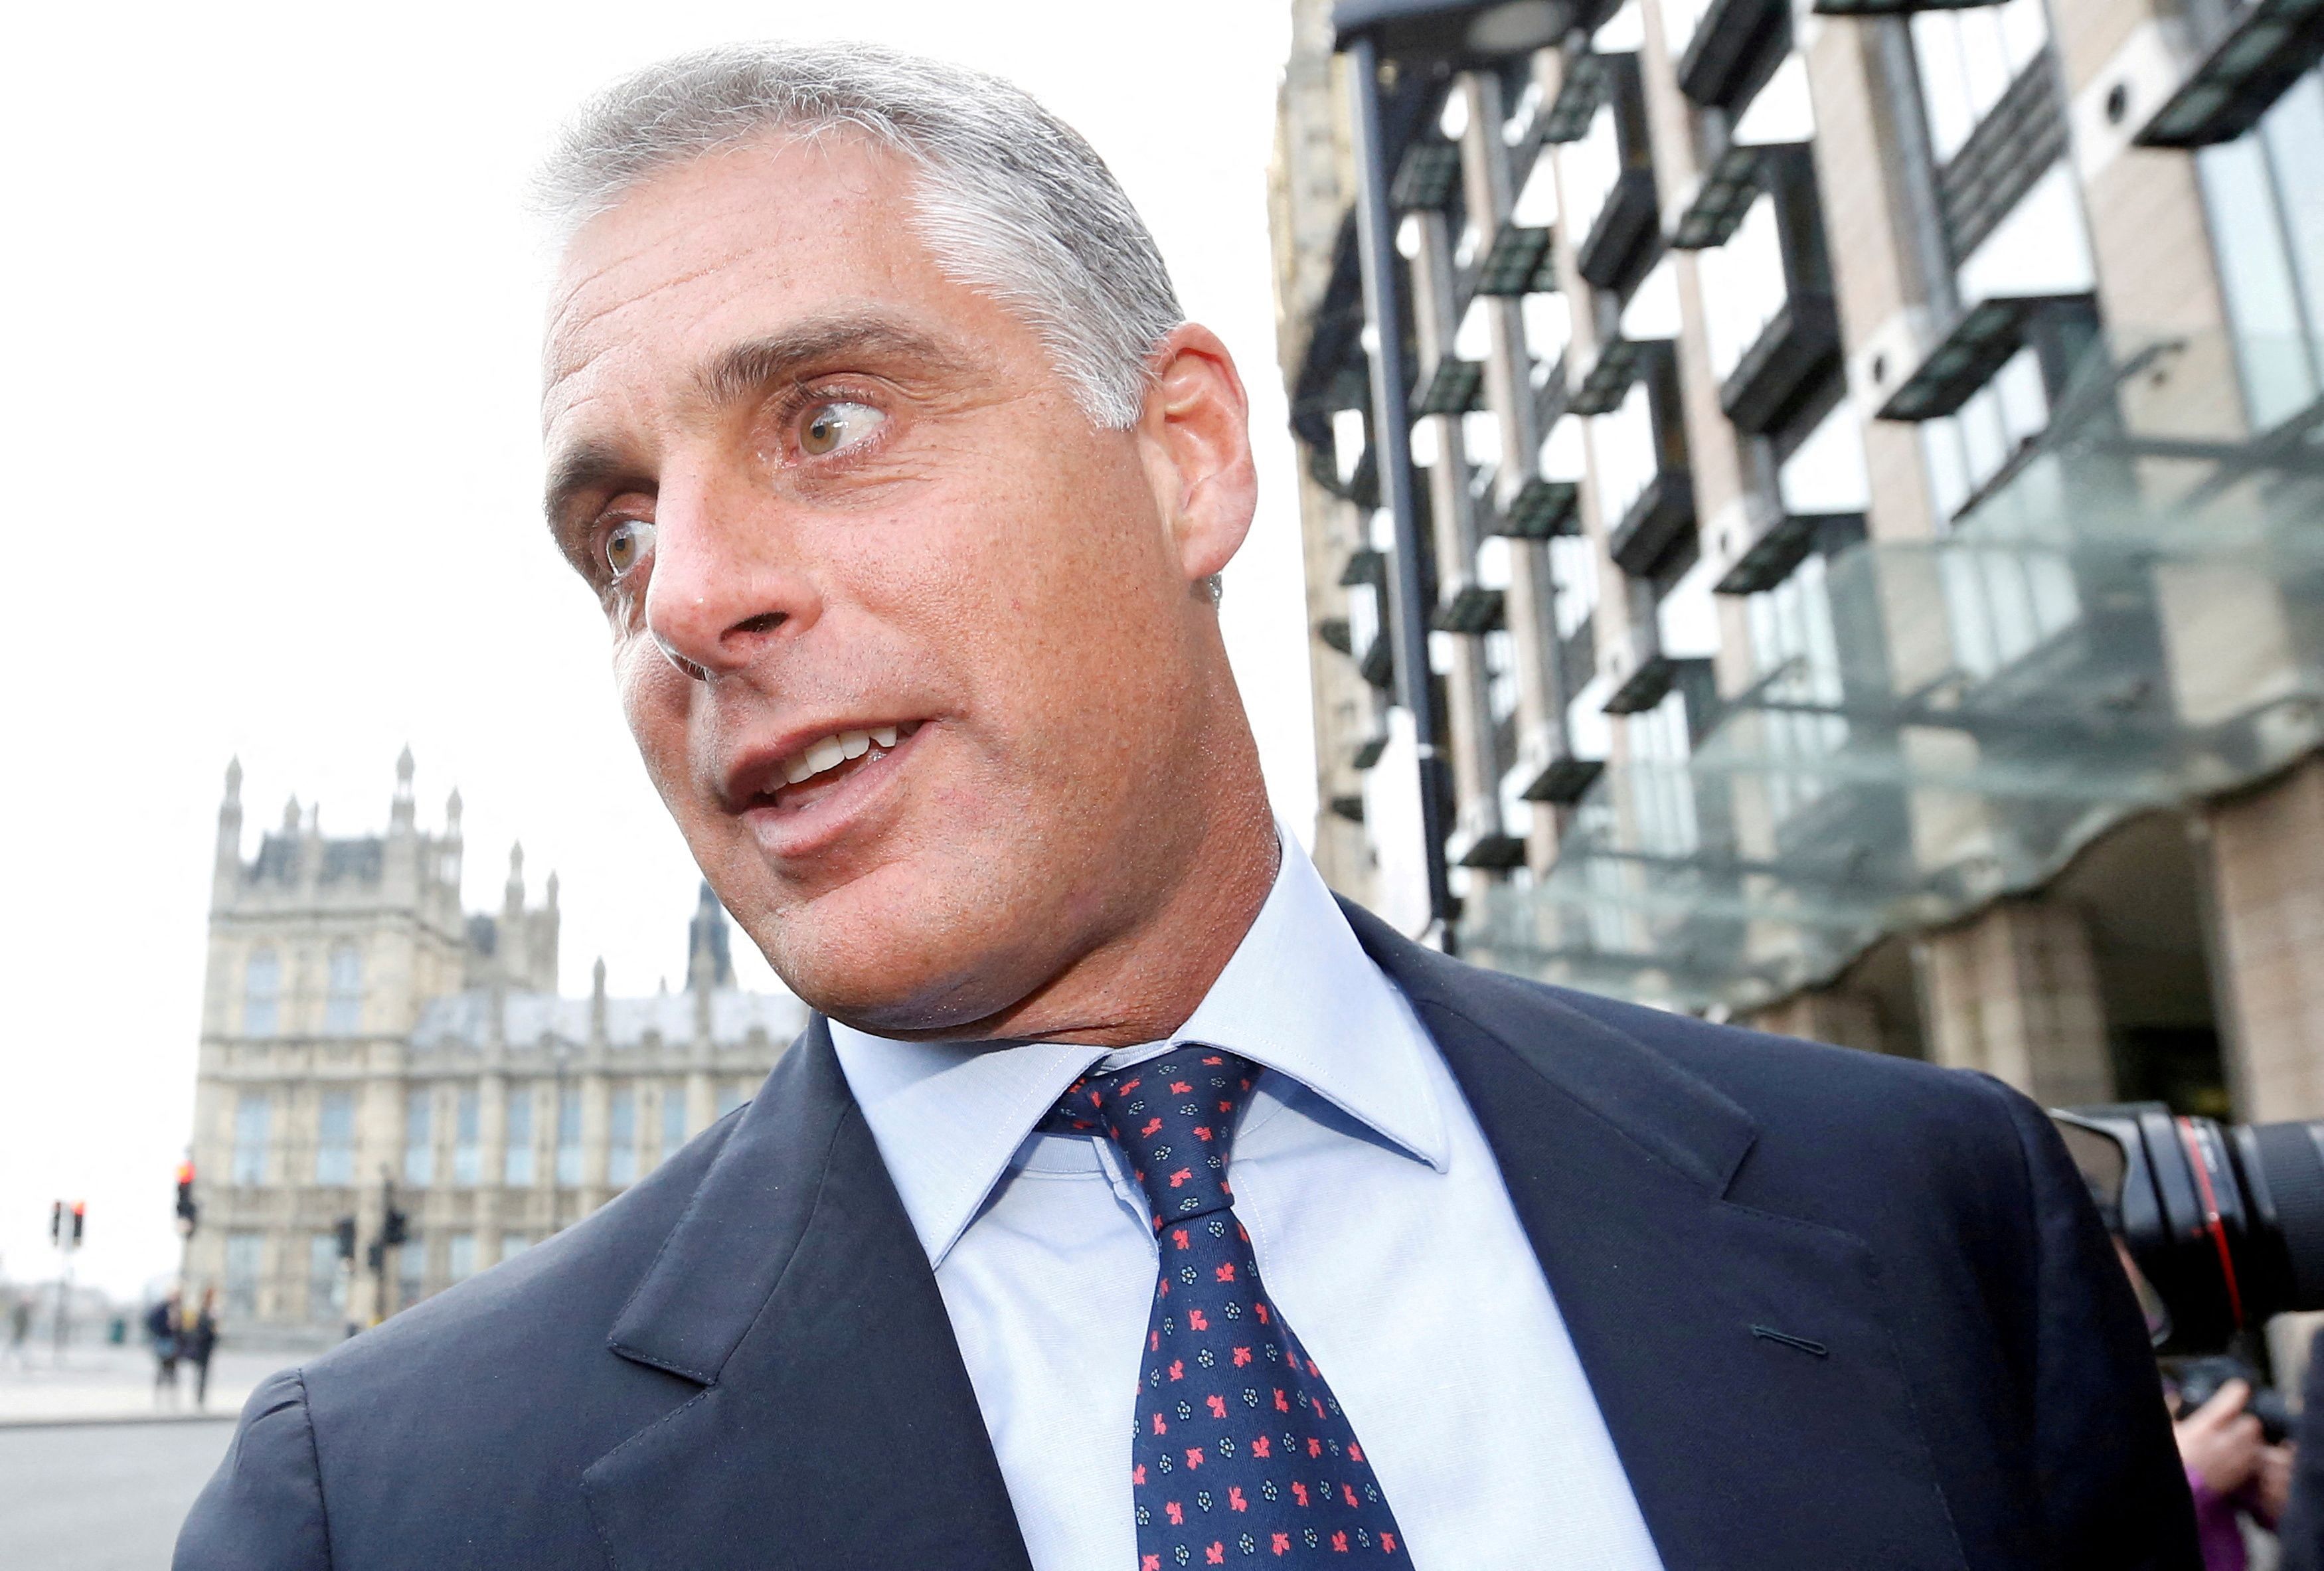 UniCredit's CEO Andrea Orcel pictured in 2013